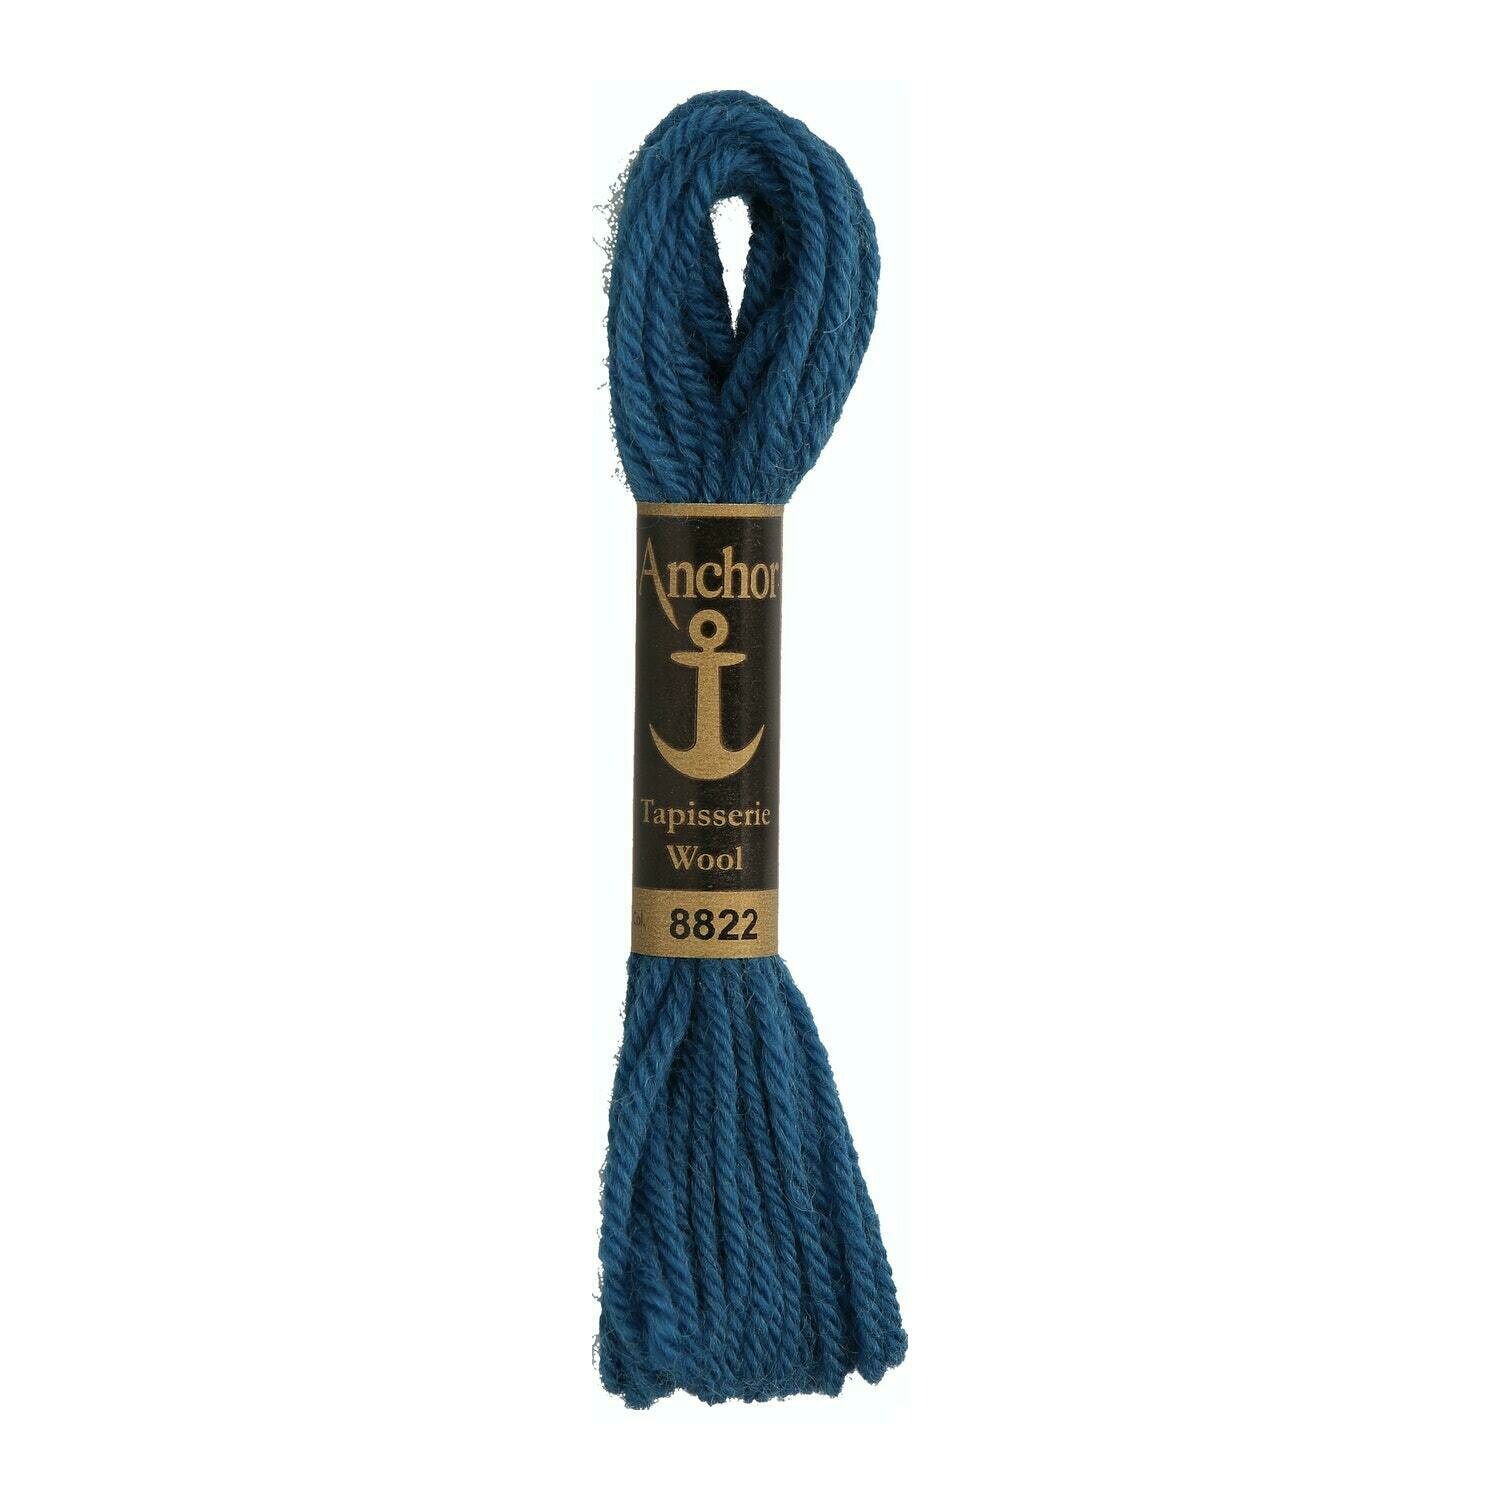 Anchor Tapisserie Wool #08822